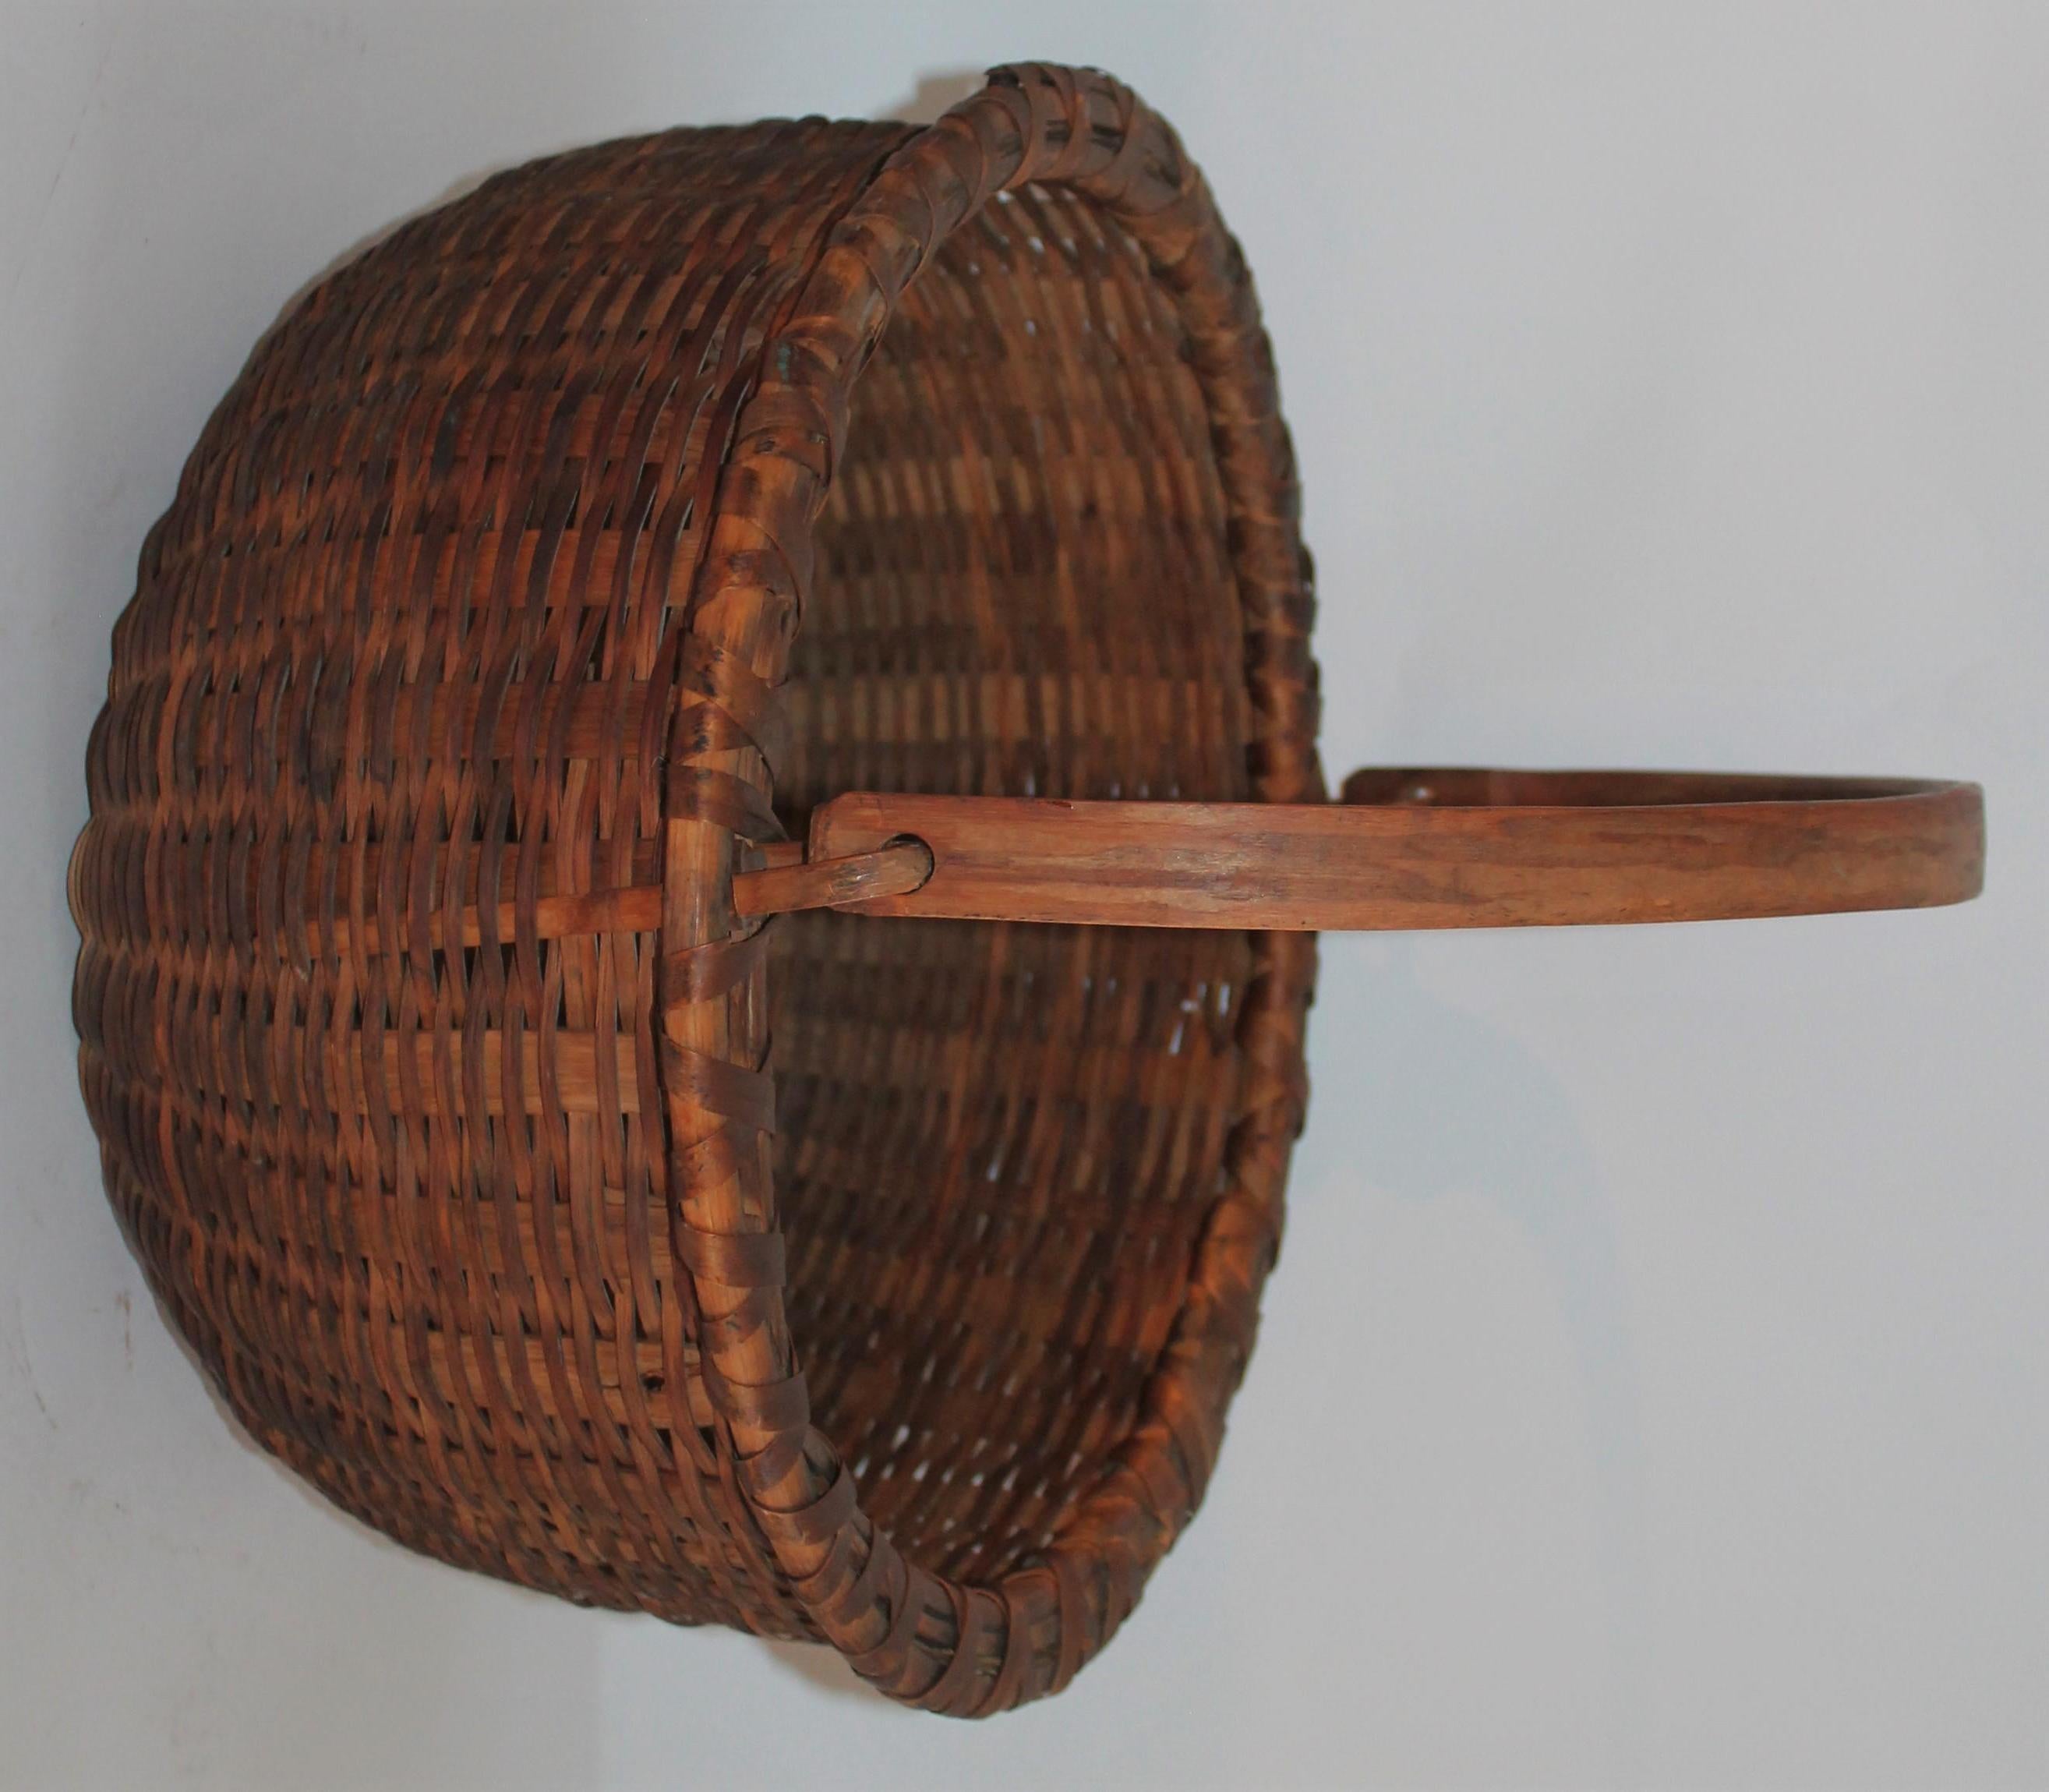 19th century handwoven basket from New England in a Shaker style format. The basket has the original kick up bottom and the original hand carved handle. The condition is pristine.